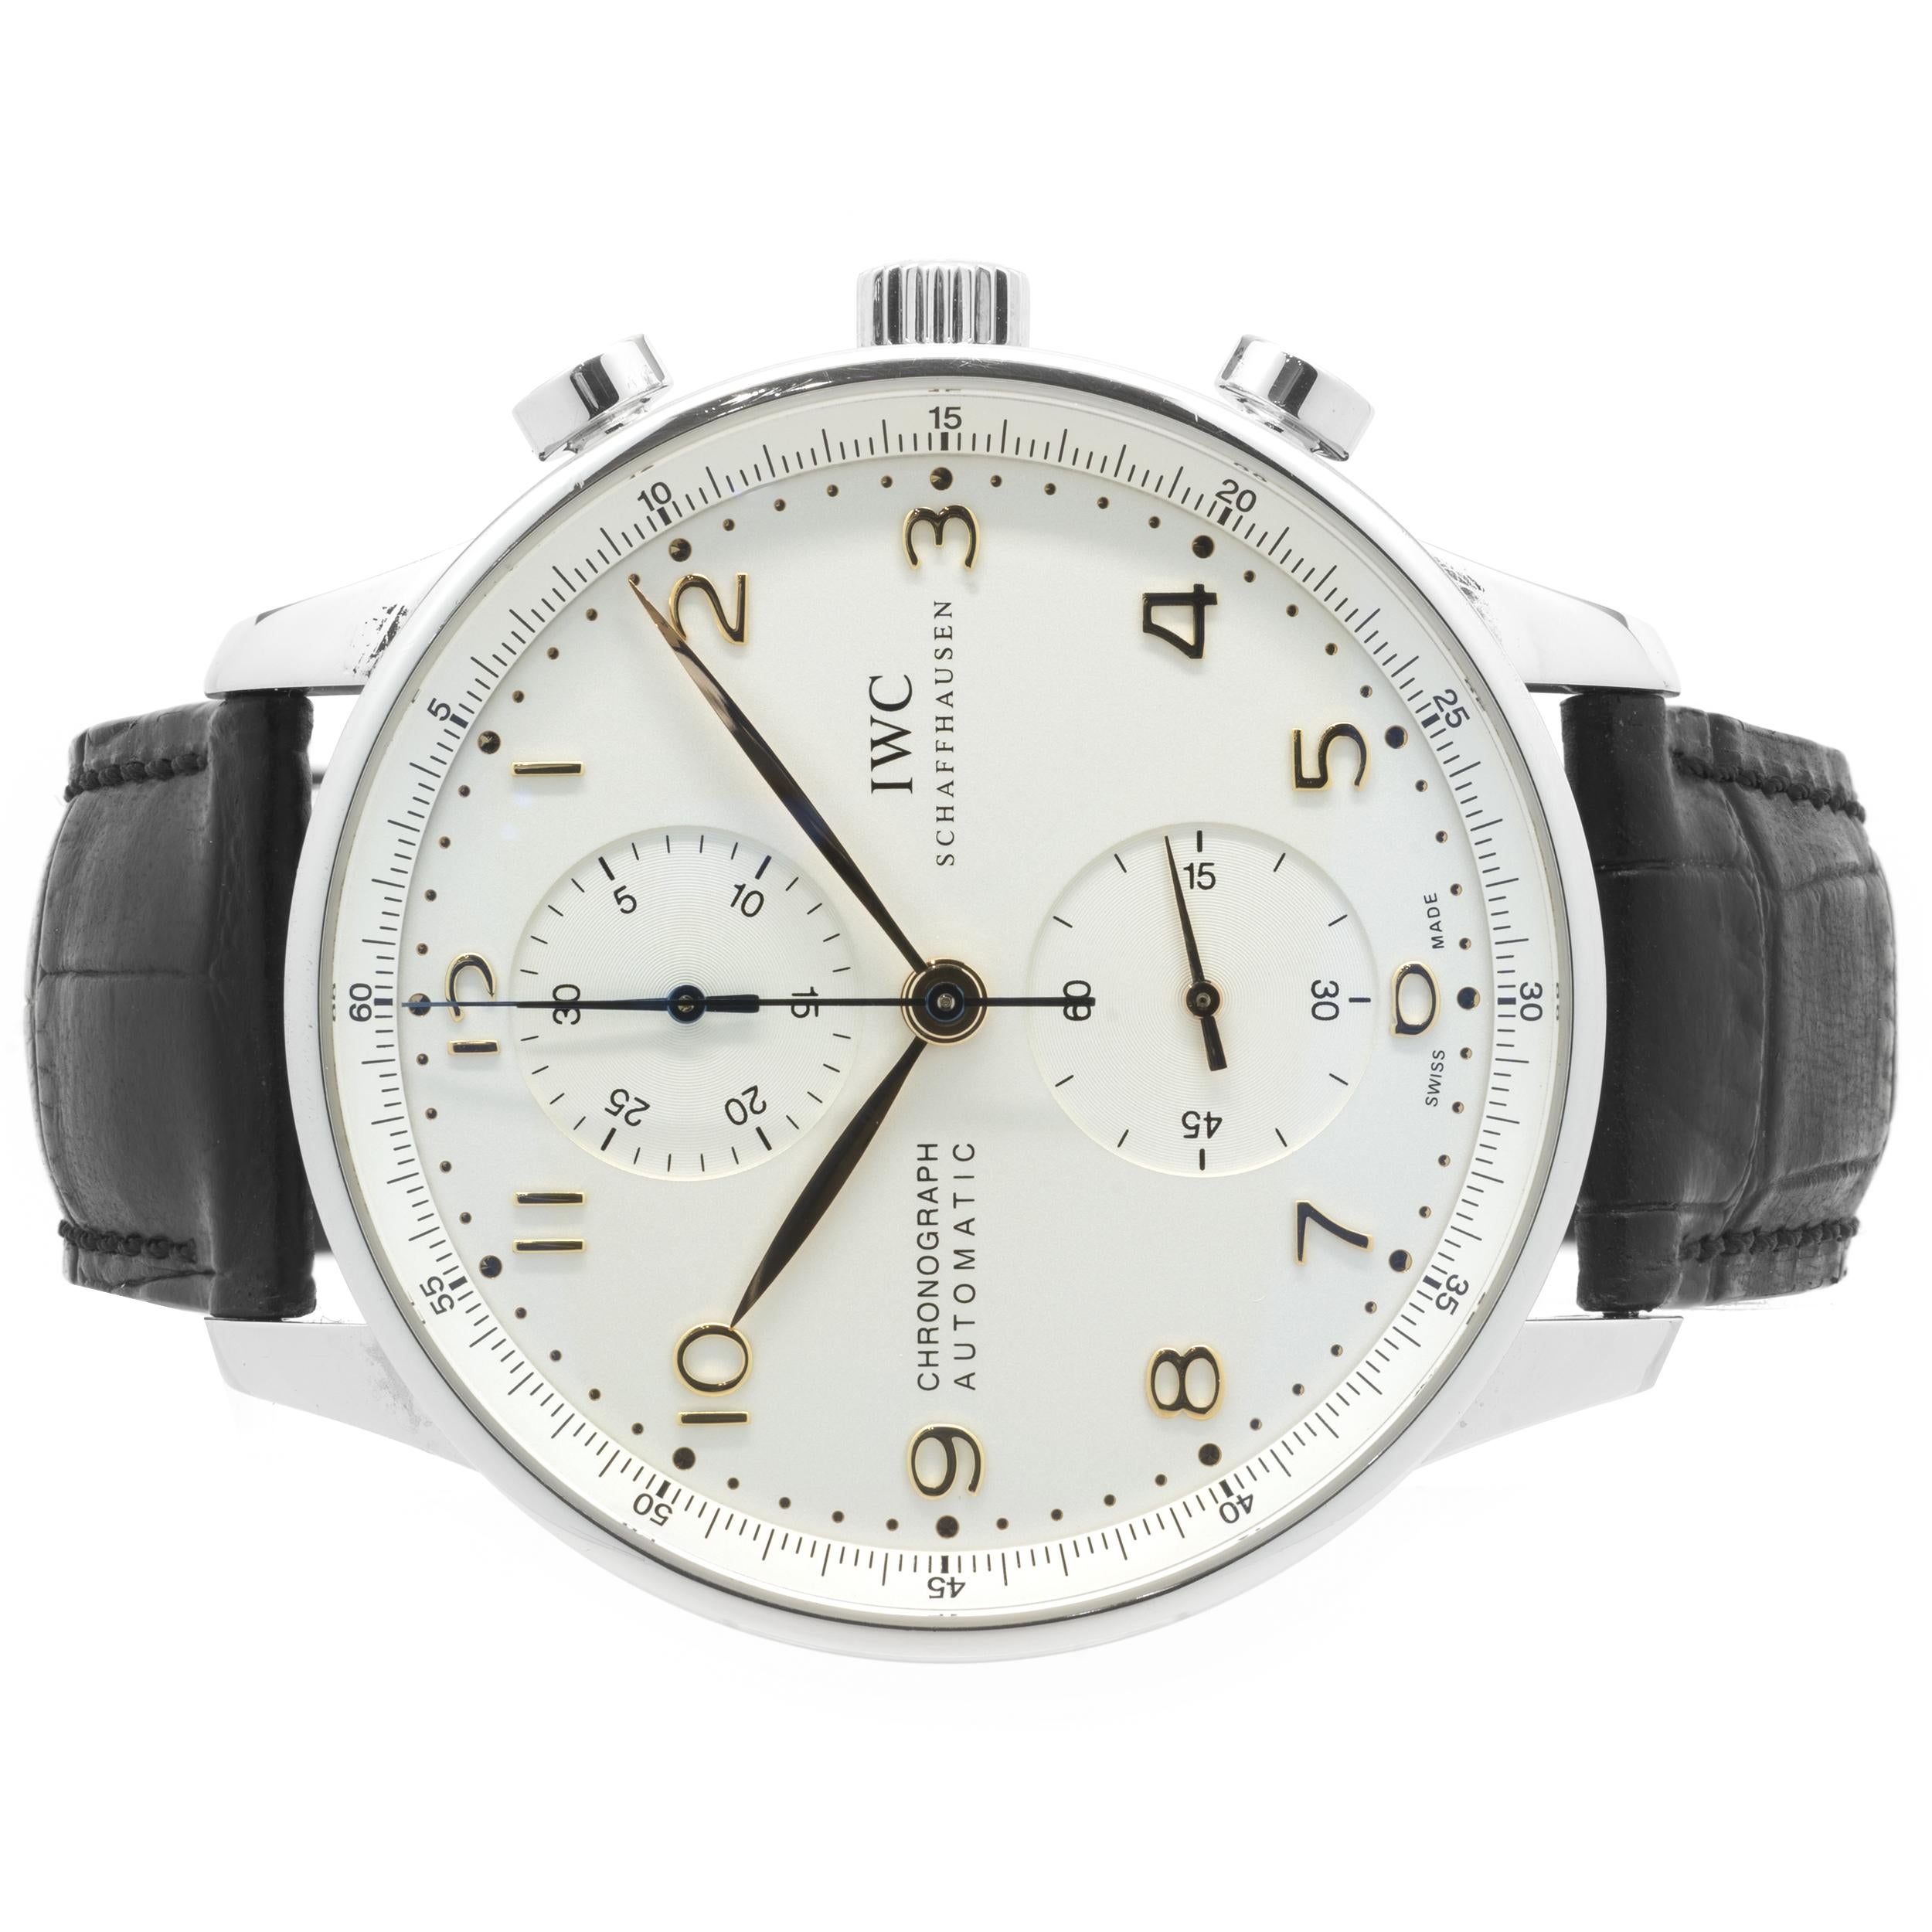 Brand: IWC
Movement: automatic
Function: hour, minutes, seconds, date, chronograph
Case: 41mm stainless steel, sapphire crystal, screw down crown
Band: black alligator strap with buckle
Dial: white dial, rose arabic dial, rose hands
Reference #: